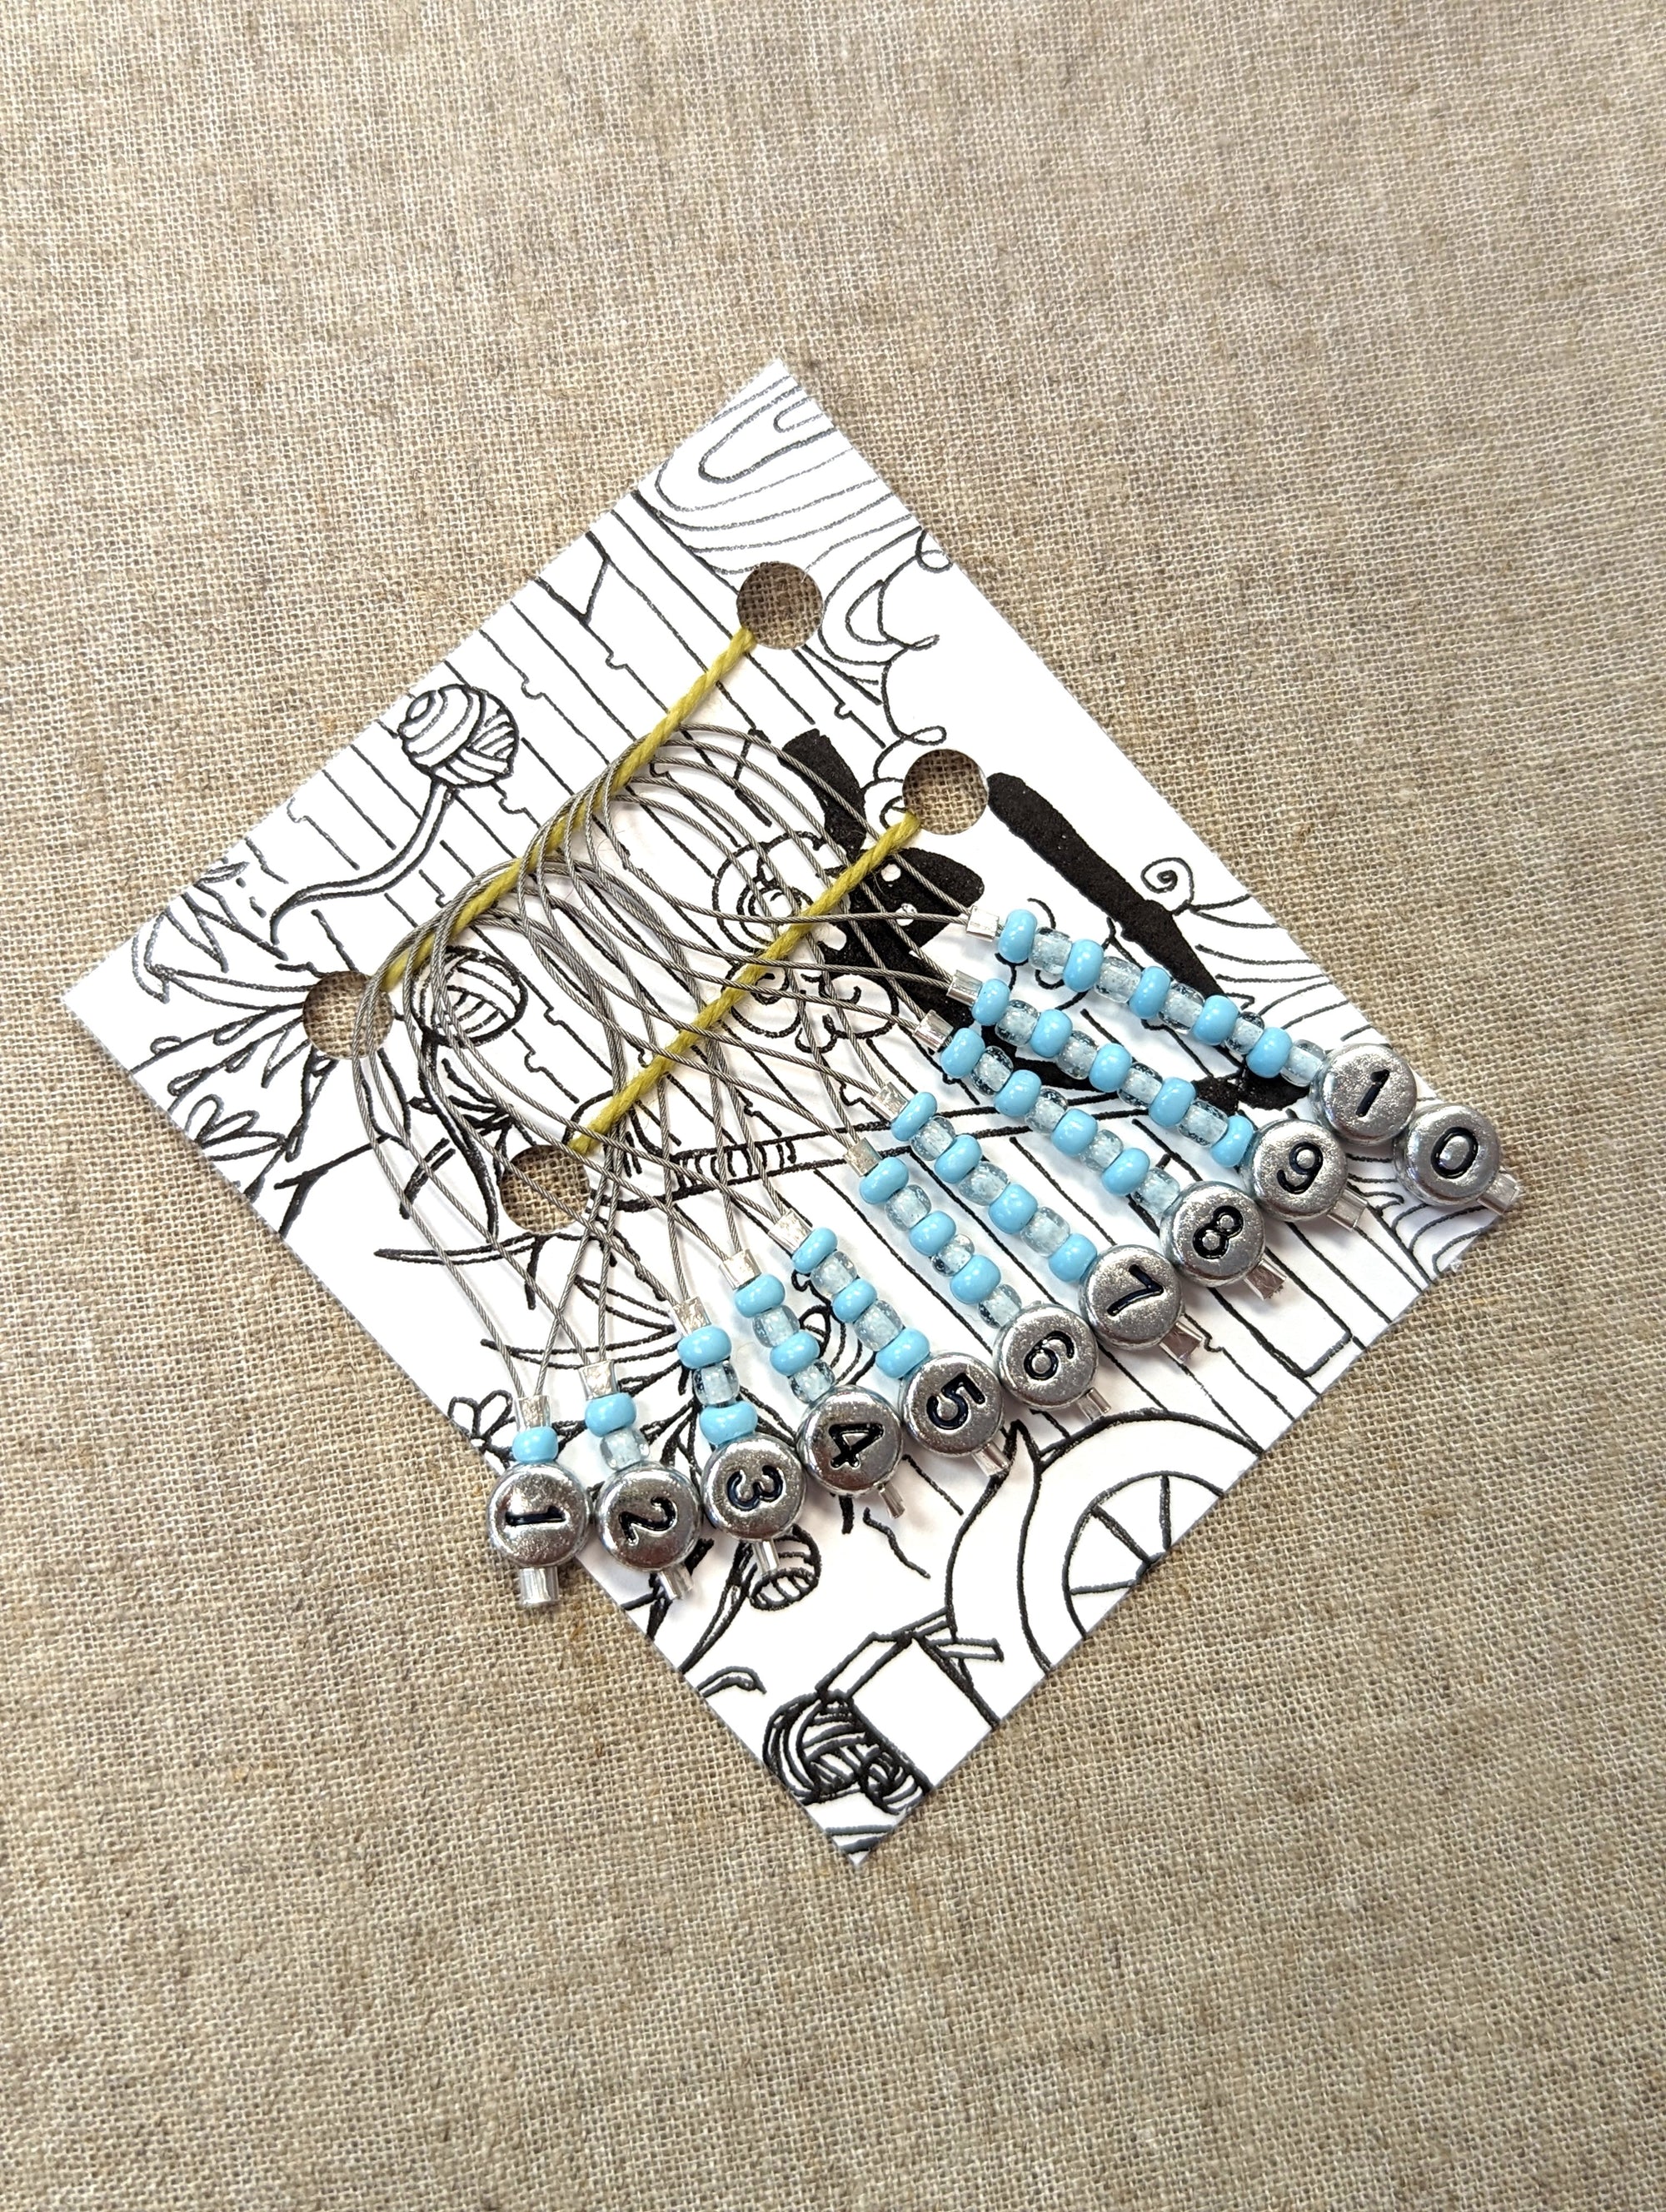 Counting Stitch Markers